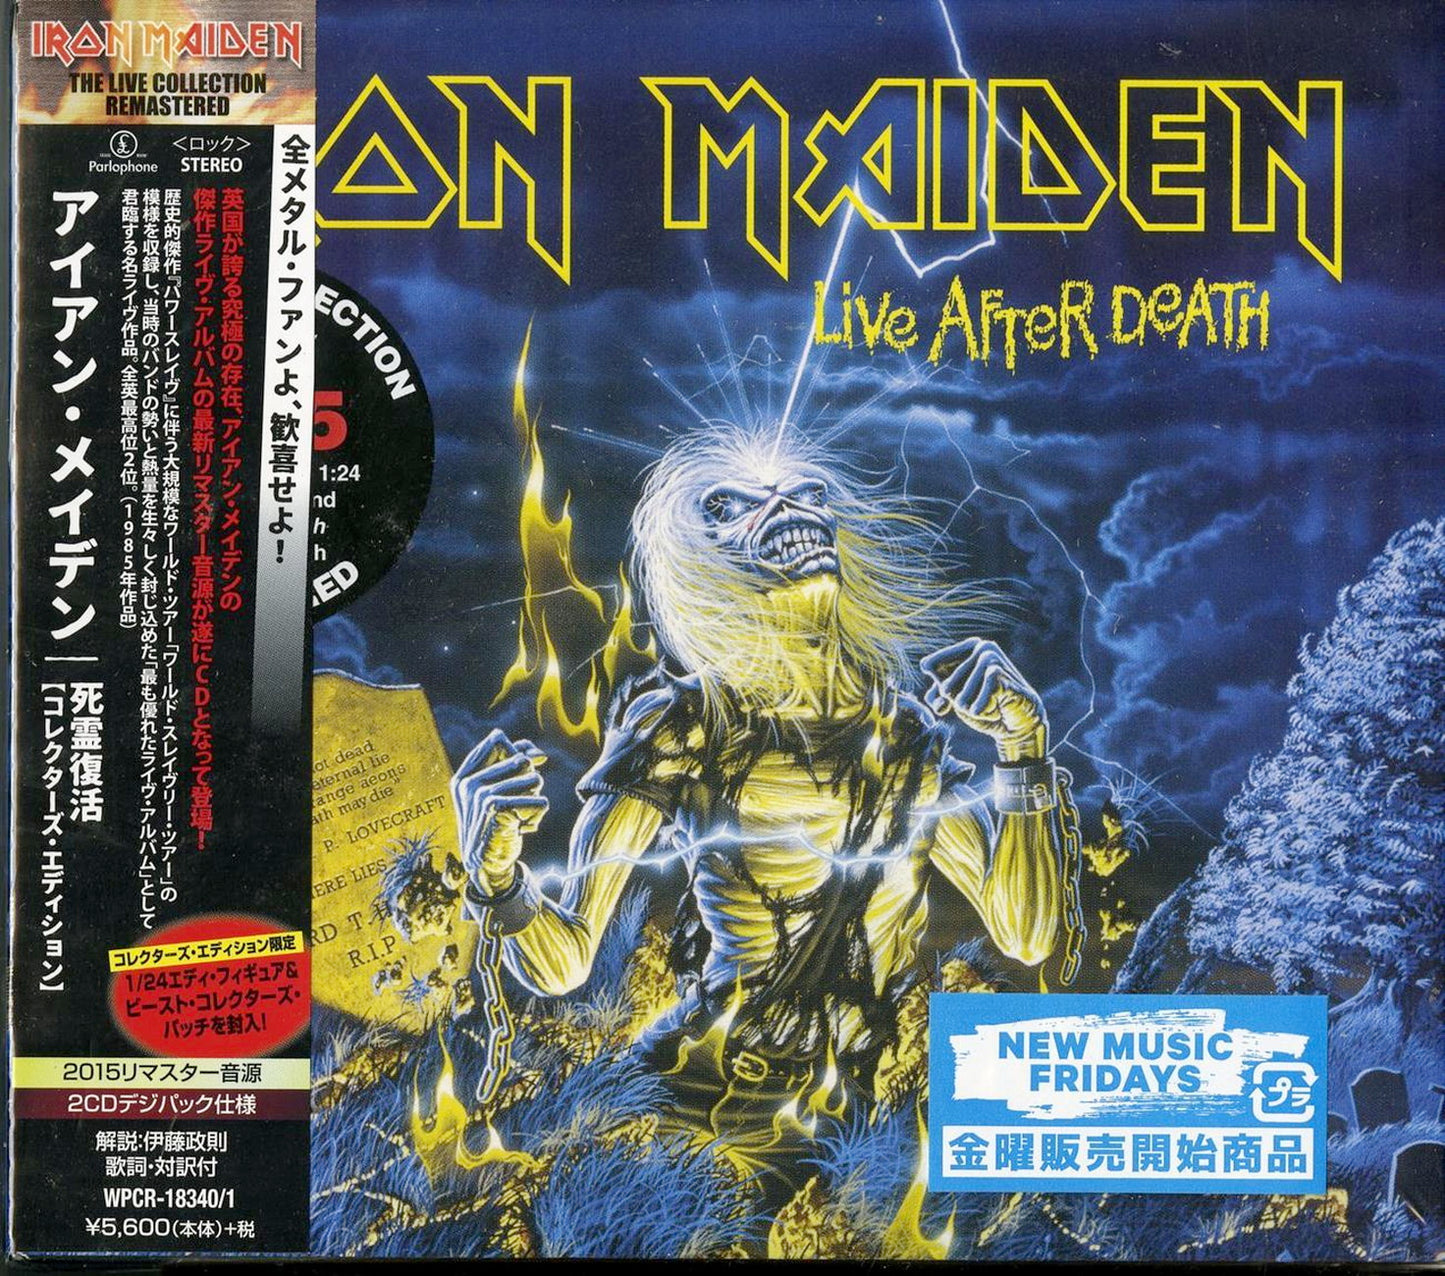 Iron Maiden - Live After Death - Japan  2 CD+Figure Limited Edition